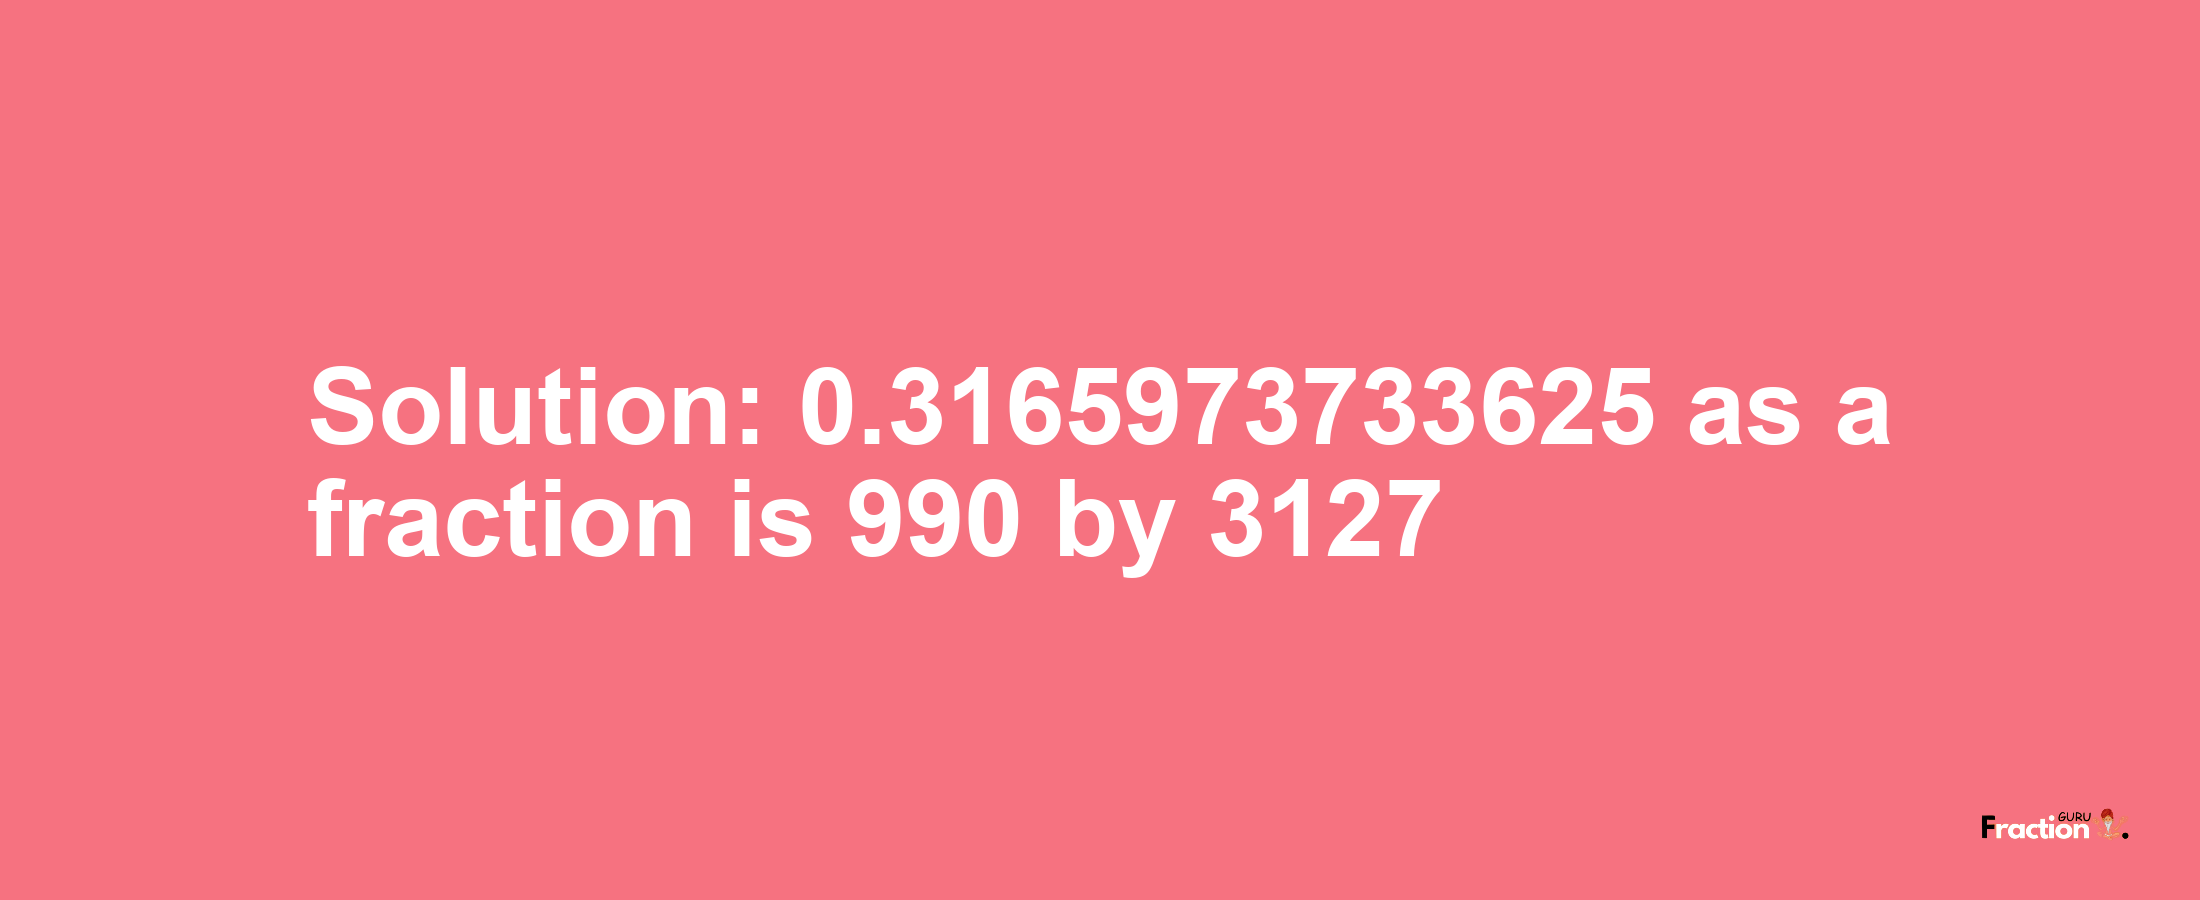 Solution:0.3165973733625 as a fraction is 990/3127